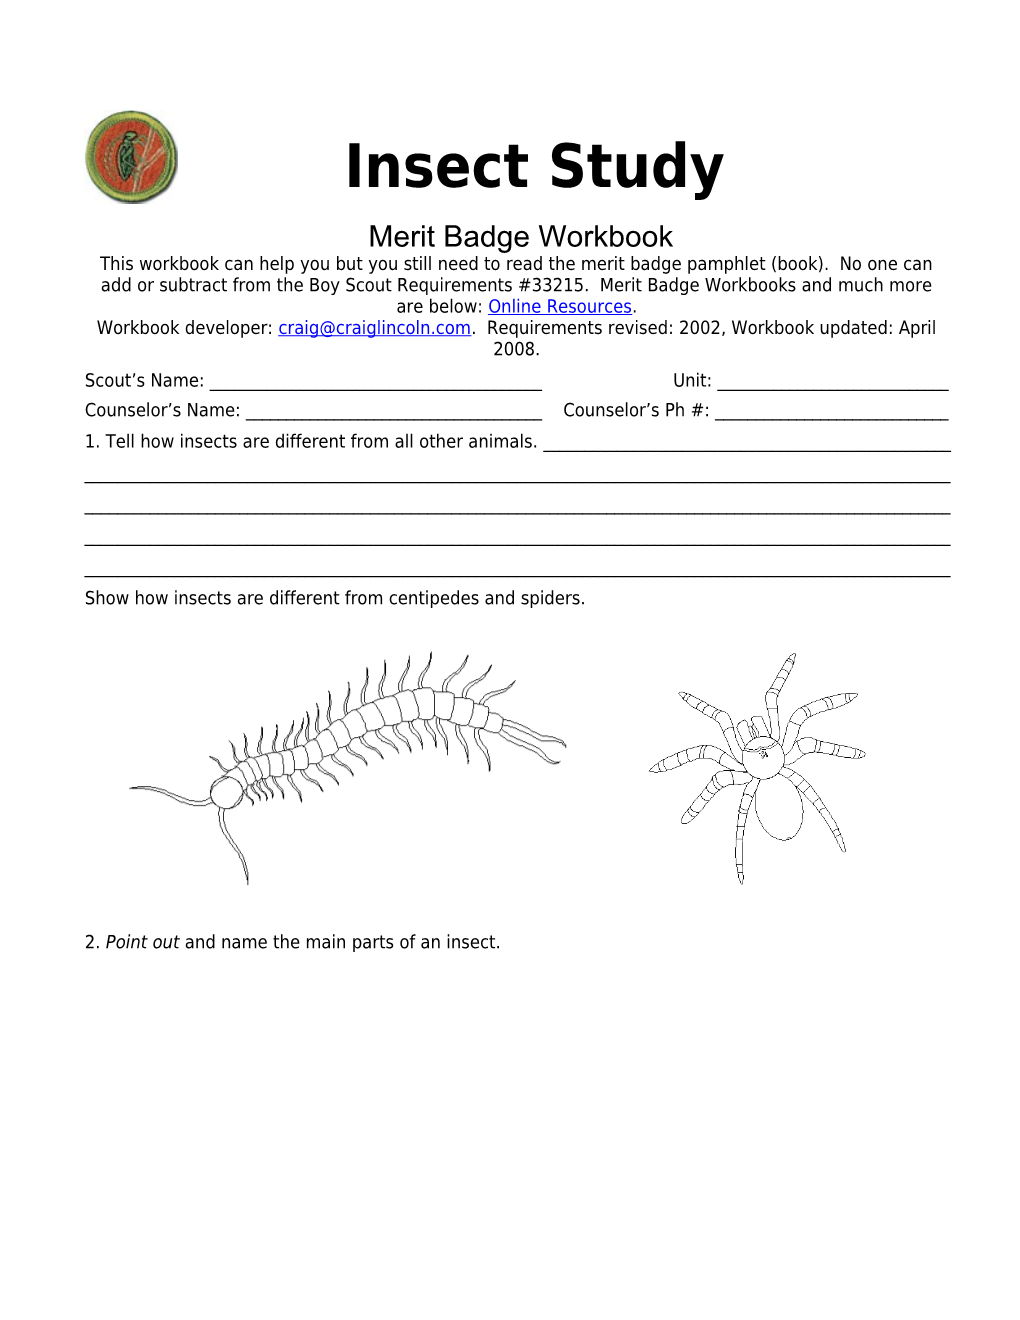 Insect Study P. 1 Merit Badge Workbookscout's Name: ______